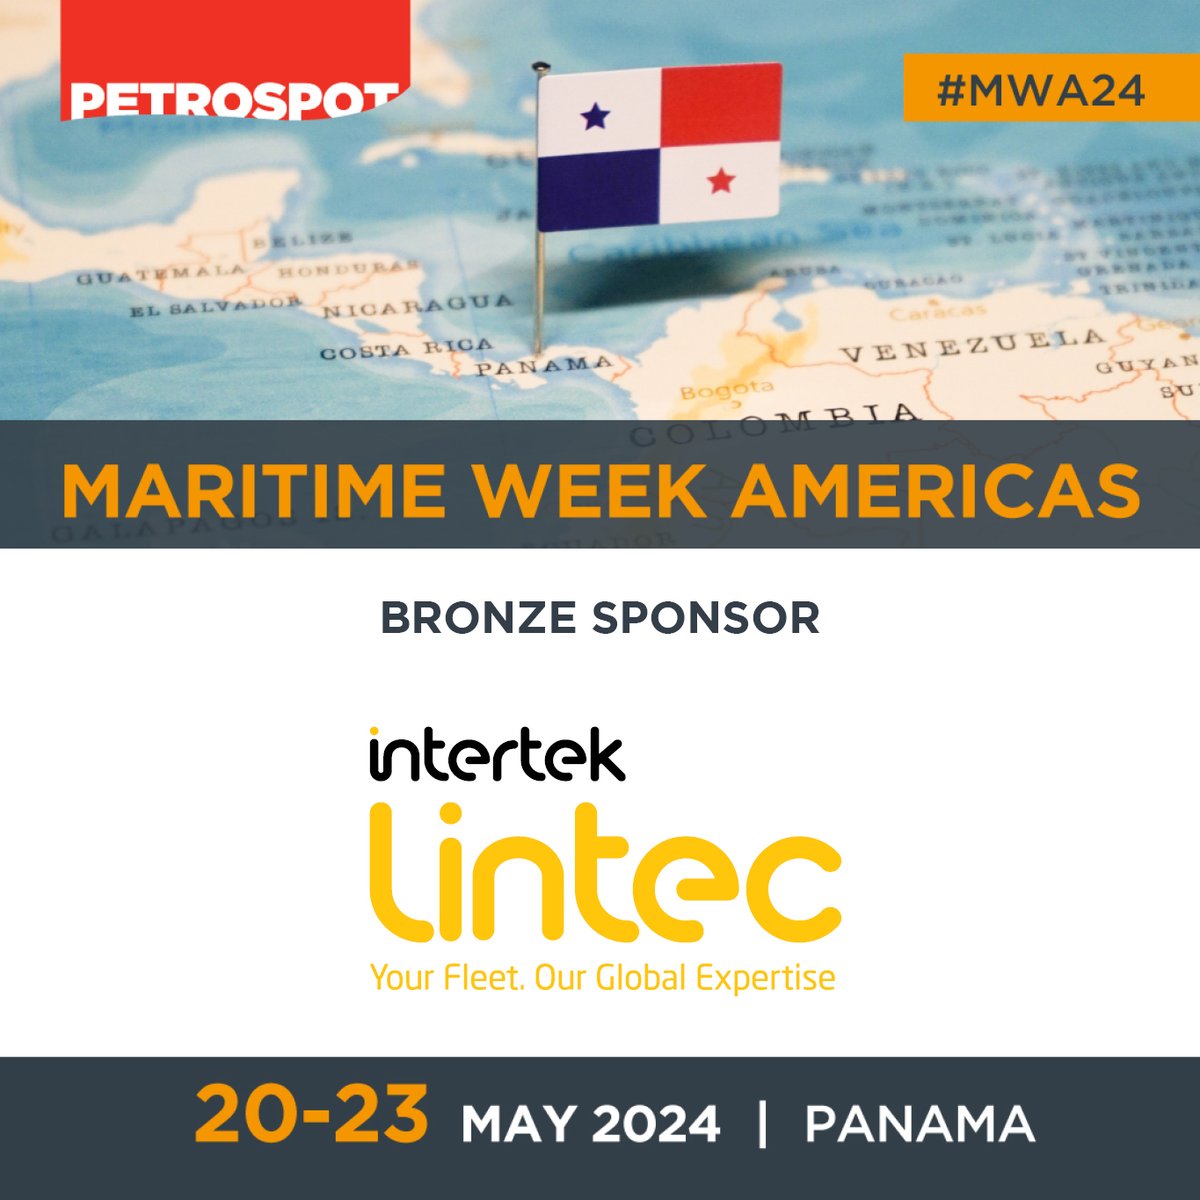 We are delighted to announce Intertek Lintec as Bronze Sponsors for Maritime Week Americas taking place in Panama 20-23 May 2024.

View the programme here ➔ lnkd.in/eBBvR_Vv

Register to attend here ➔ lnkd.in/eZDcj2UB

#MWA24 #Panama #Shipping #Bunkering #maritime